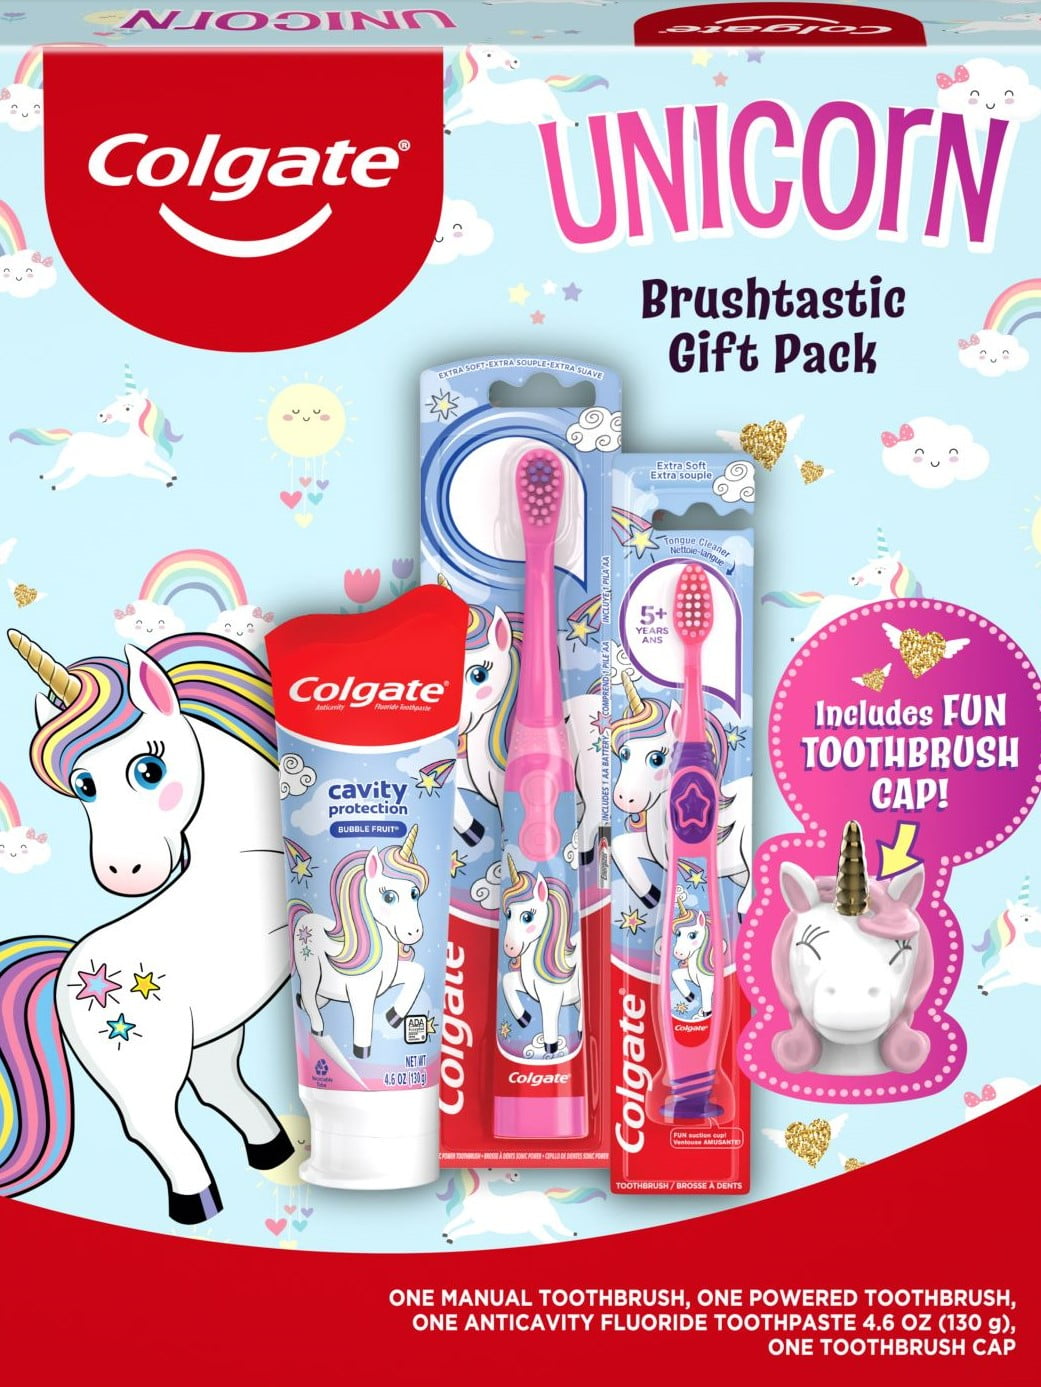 Colgate Unicorn Toothpaste Holiday Gift Pack